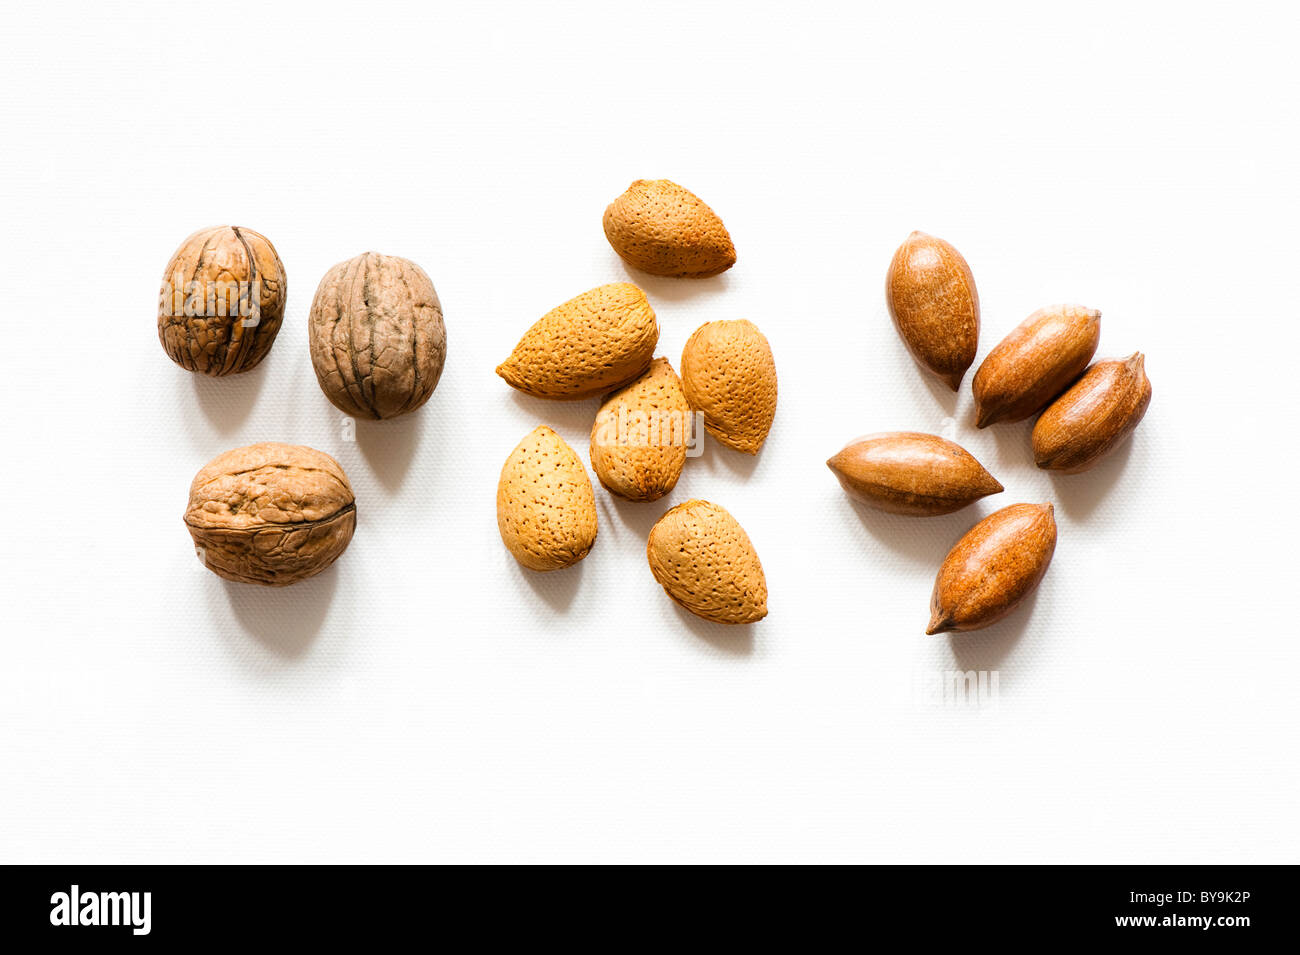 Three walnuts, six almonds and five pecan nuts against a white background Stock Photo